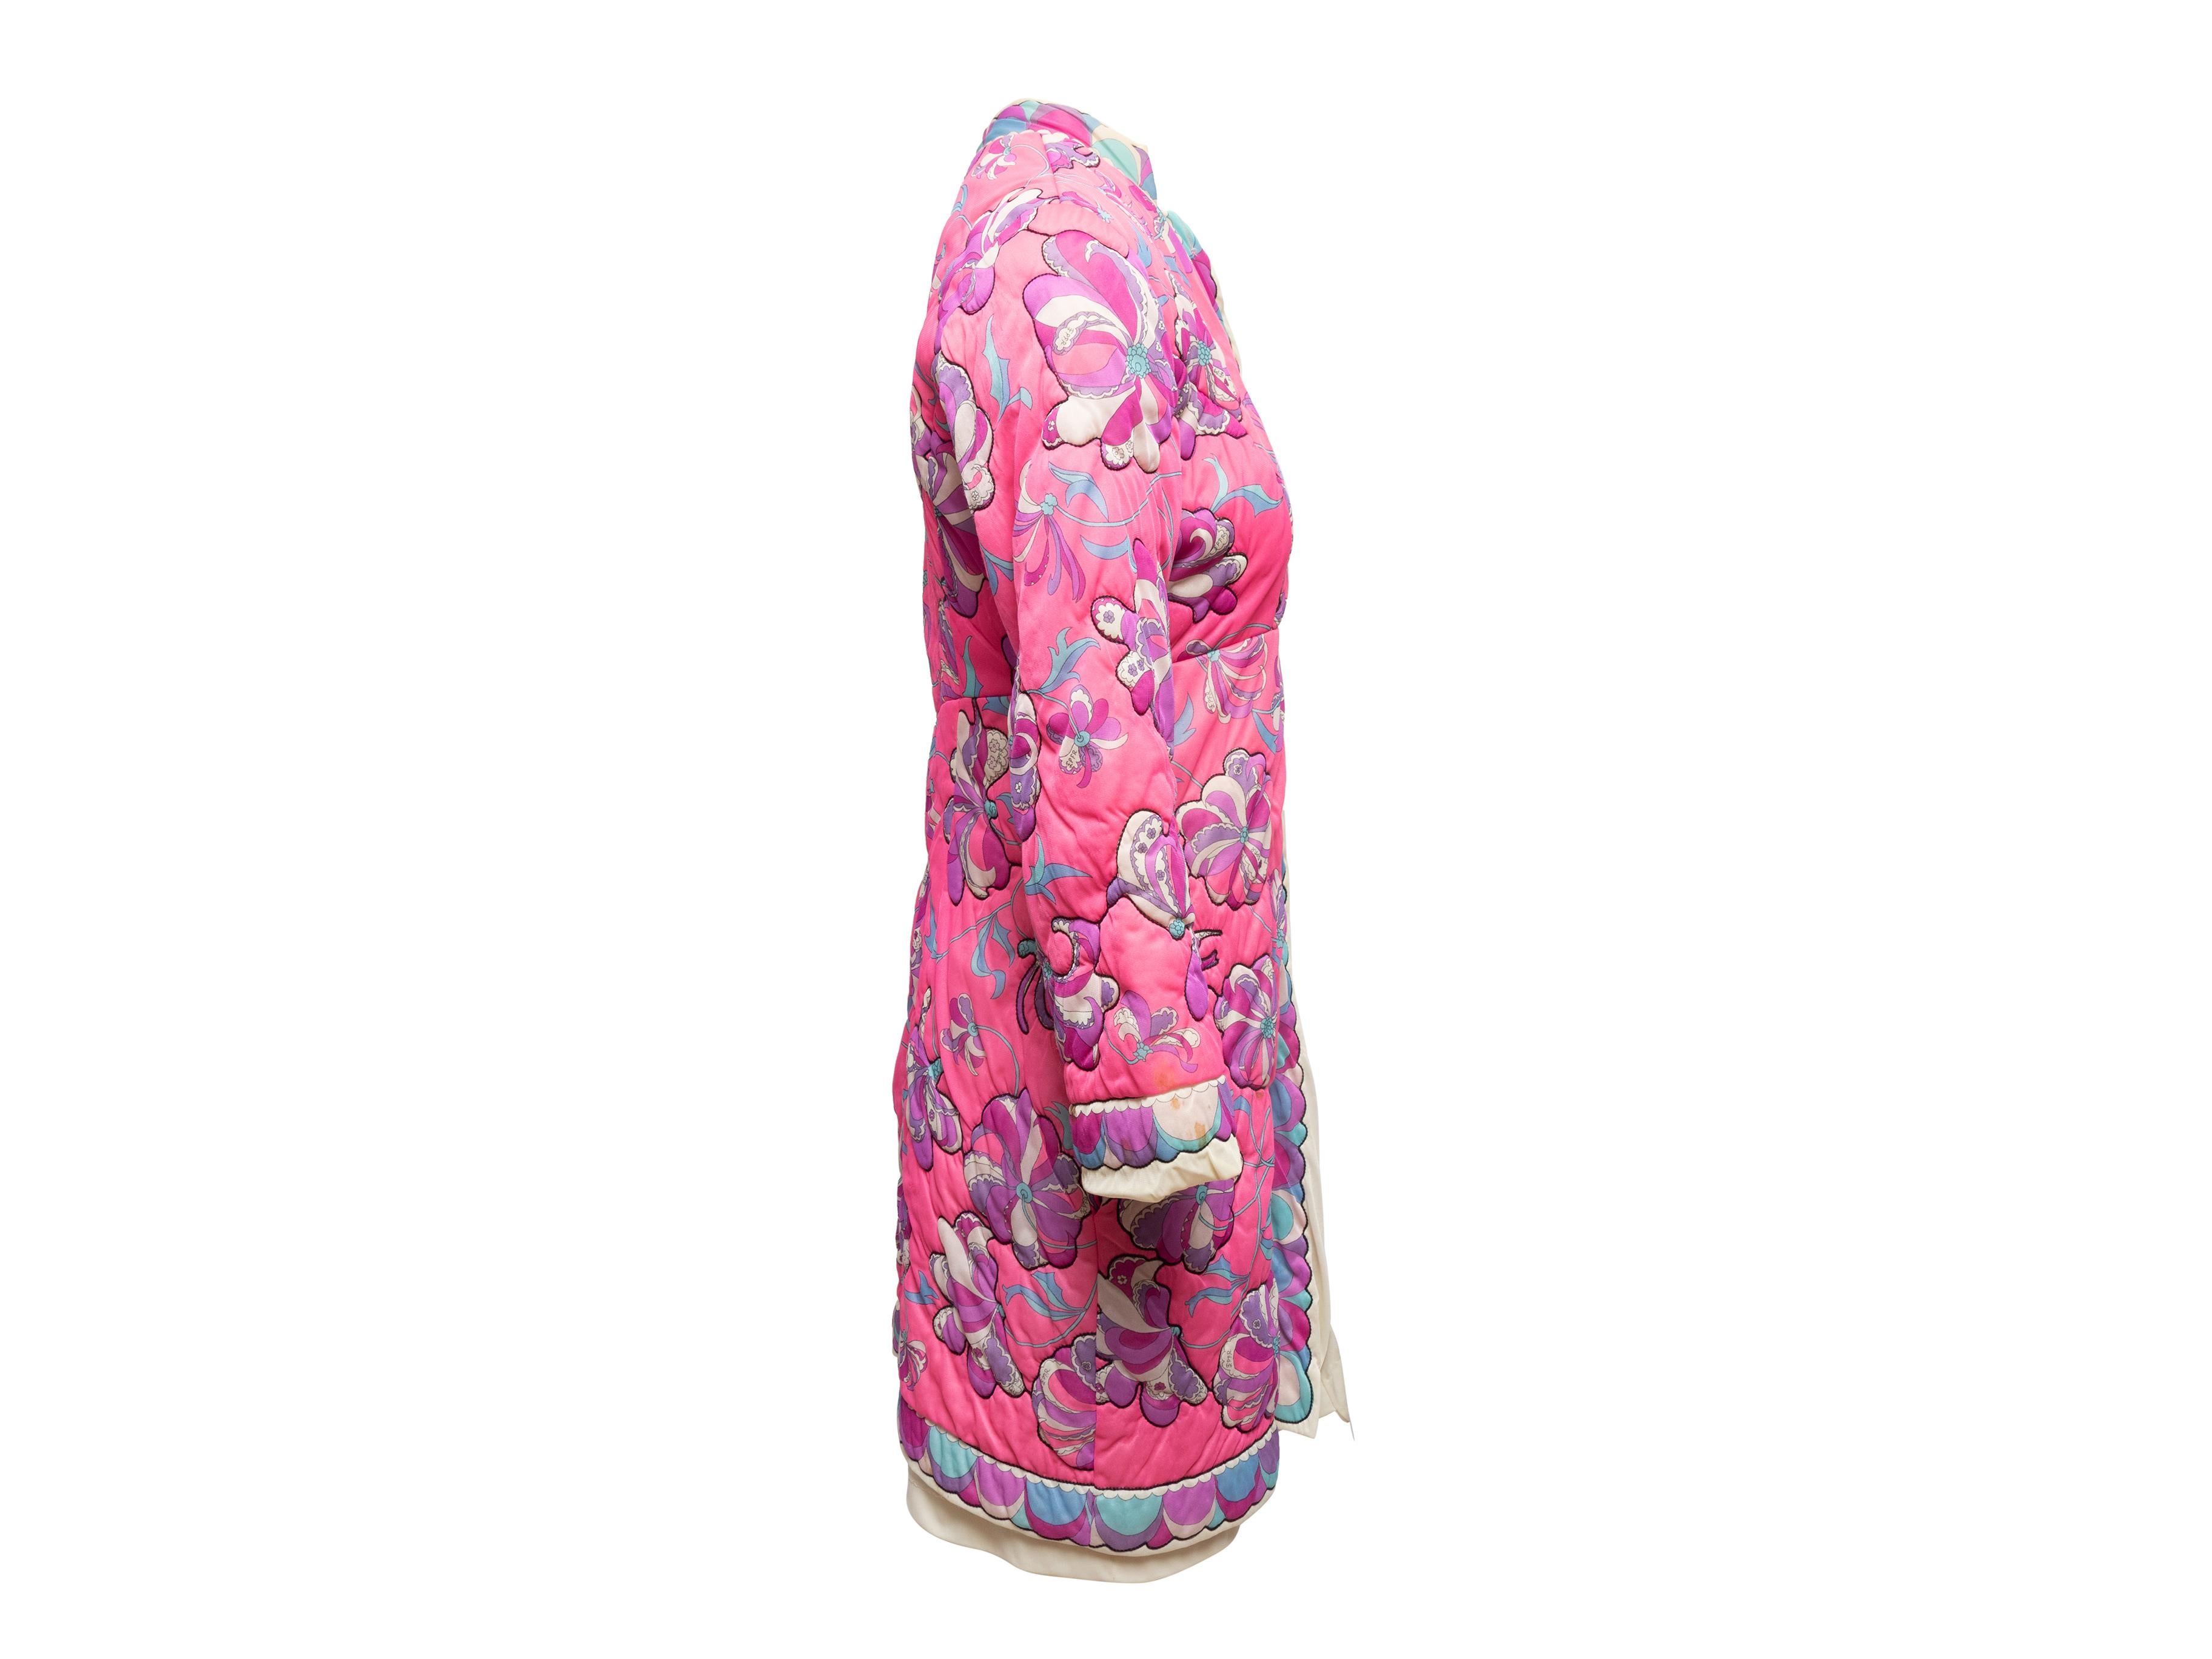 Product Details: Vintage pink and multicolor floral print house coat by Emilio Pucci for Formfit Rogers. Mandarin collar. Button closures at center front. 34